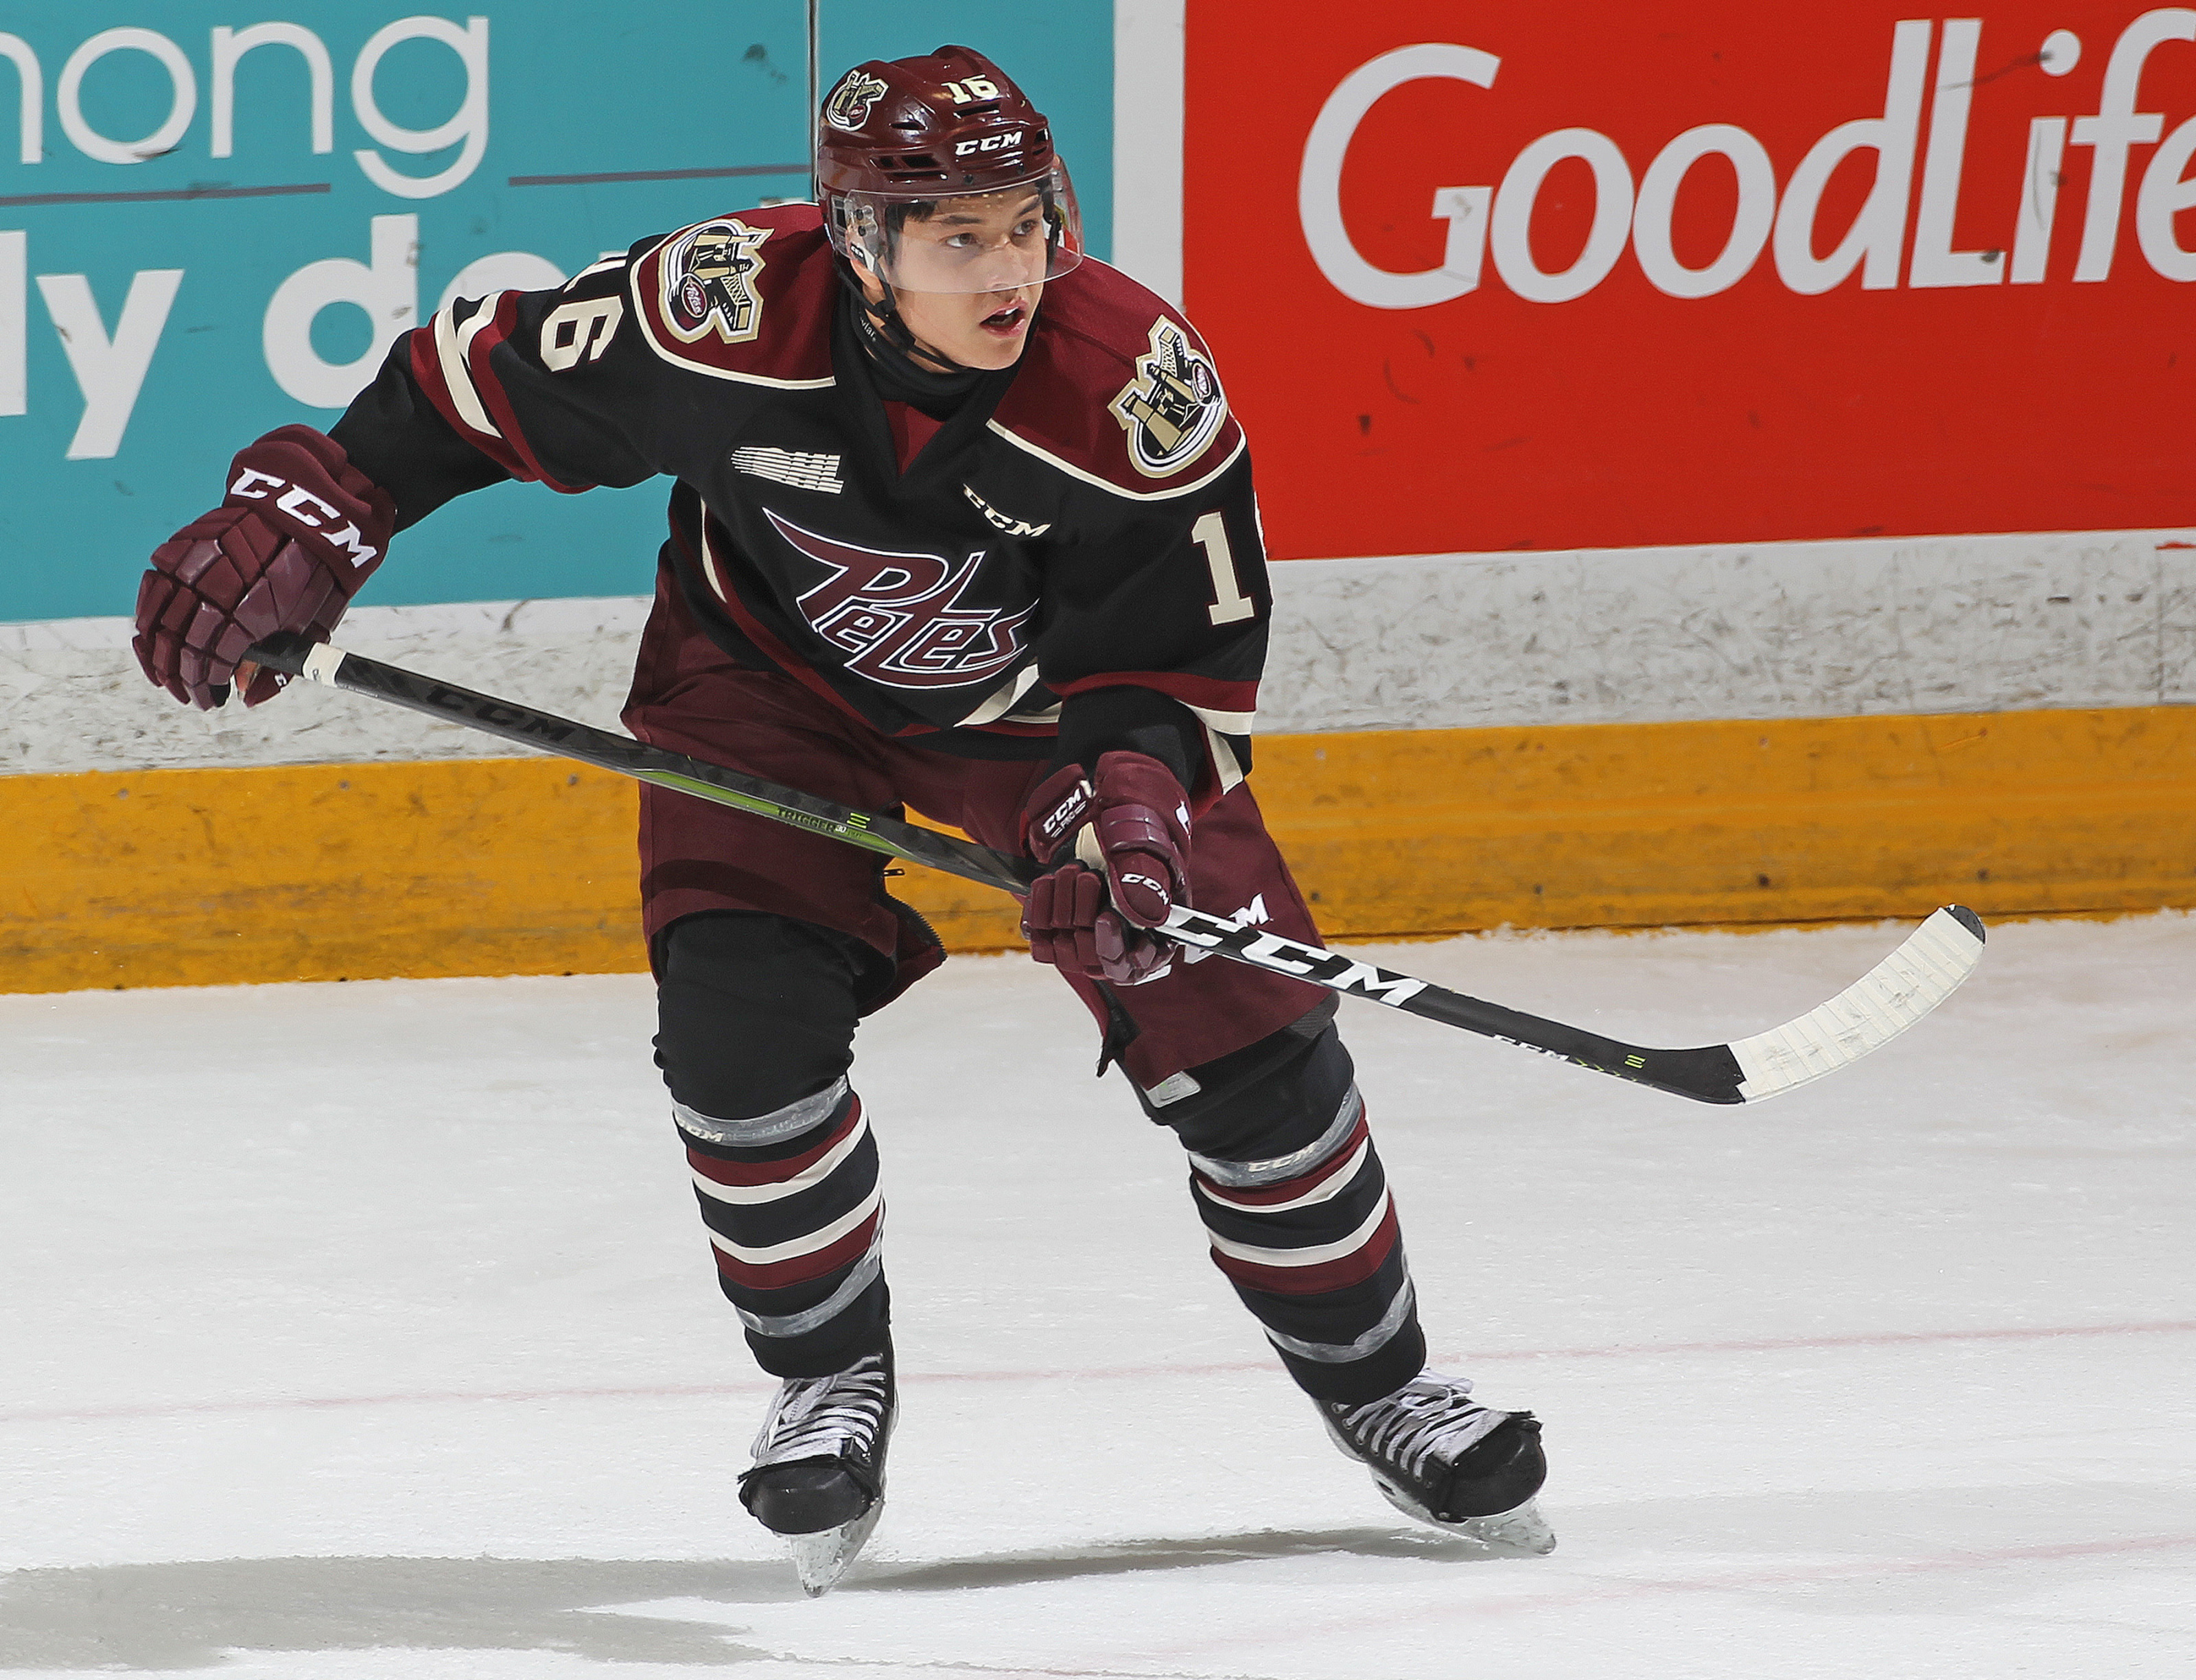 Leafs prospect Nick Robertson led the OHL in scoring this season